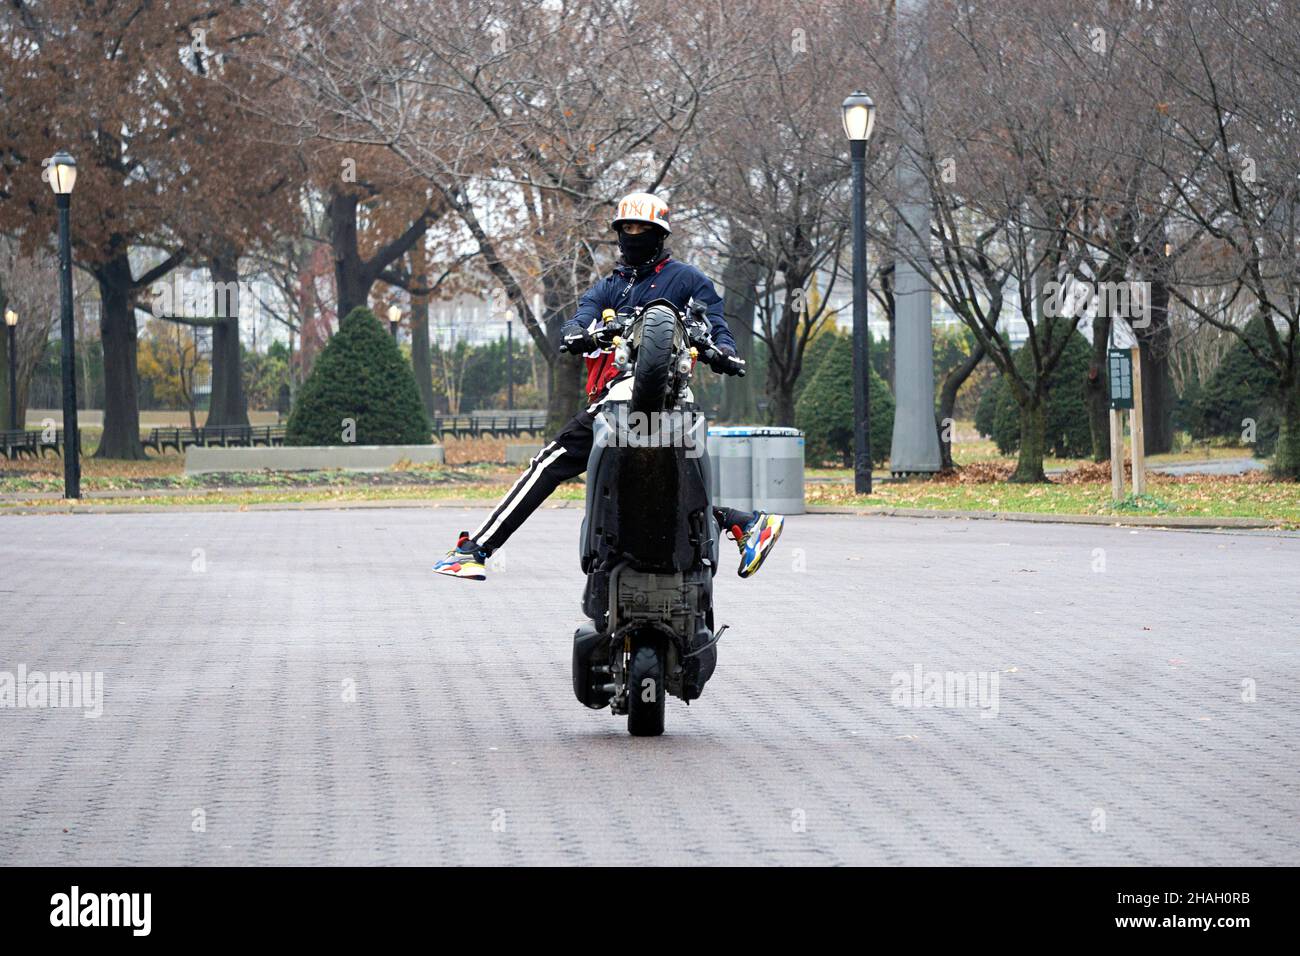 A teenage biker with a helmet & mask does a wheelie on his Yamaha TMax while his legs are off the bike. In a park in Queens, New York City. Stock Photo